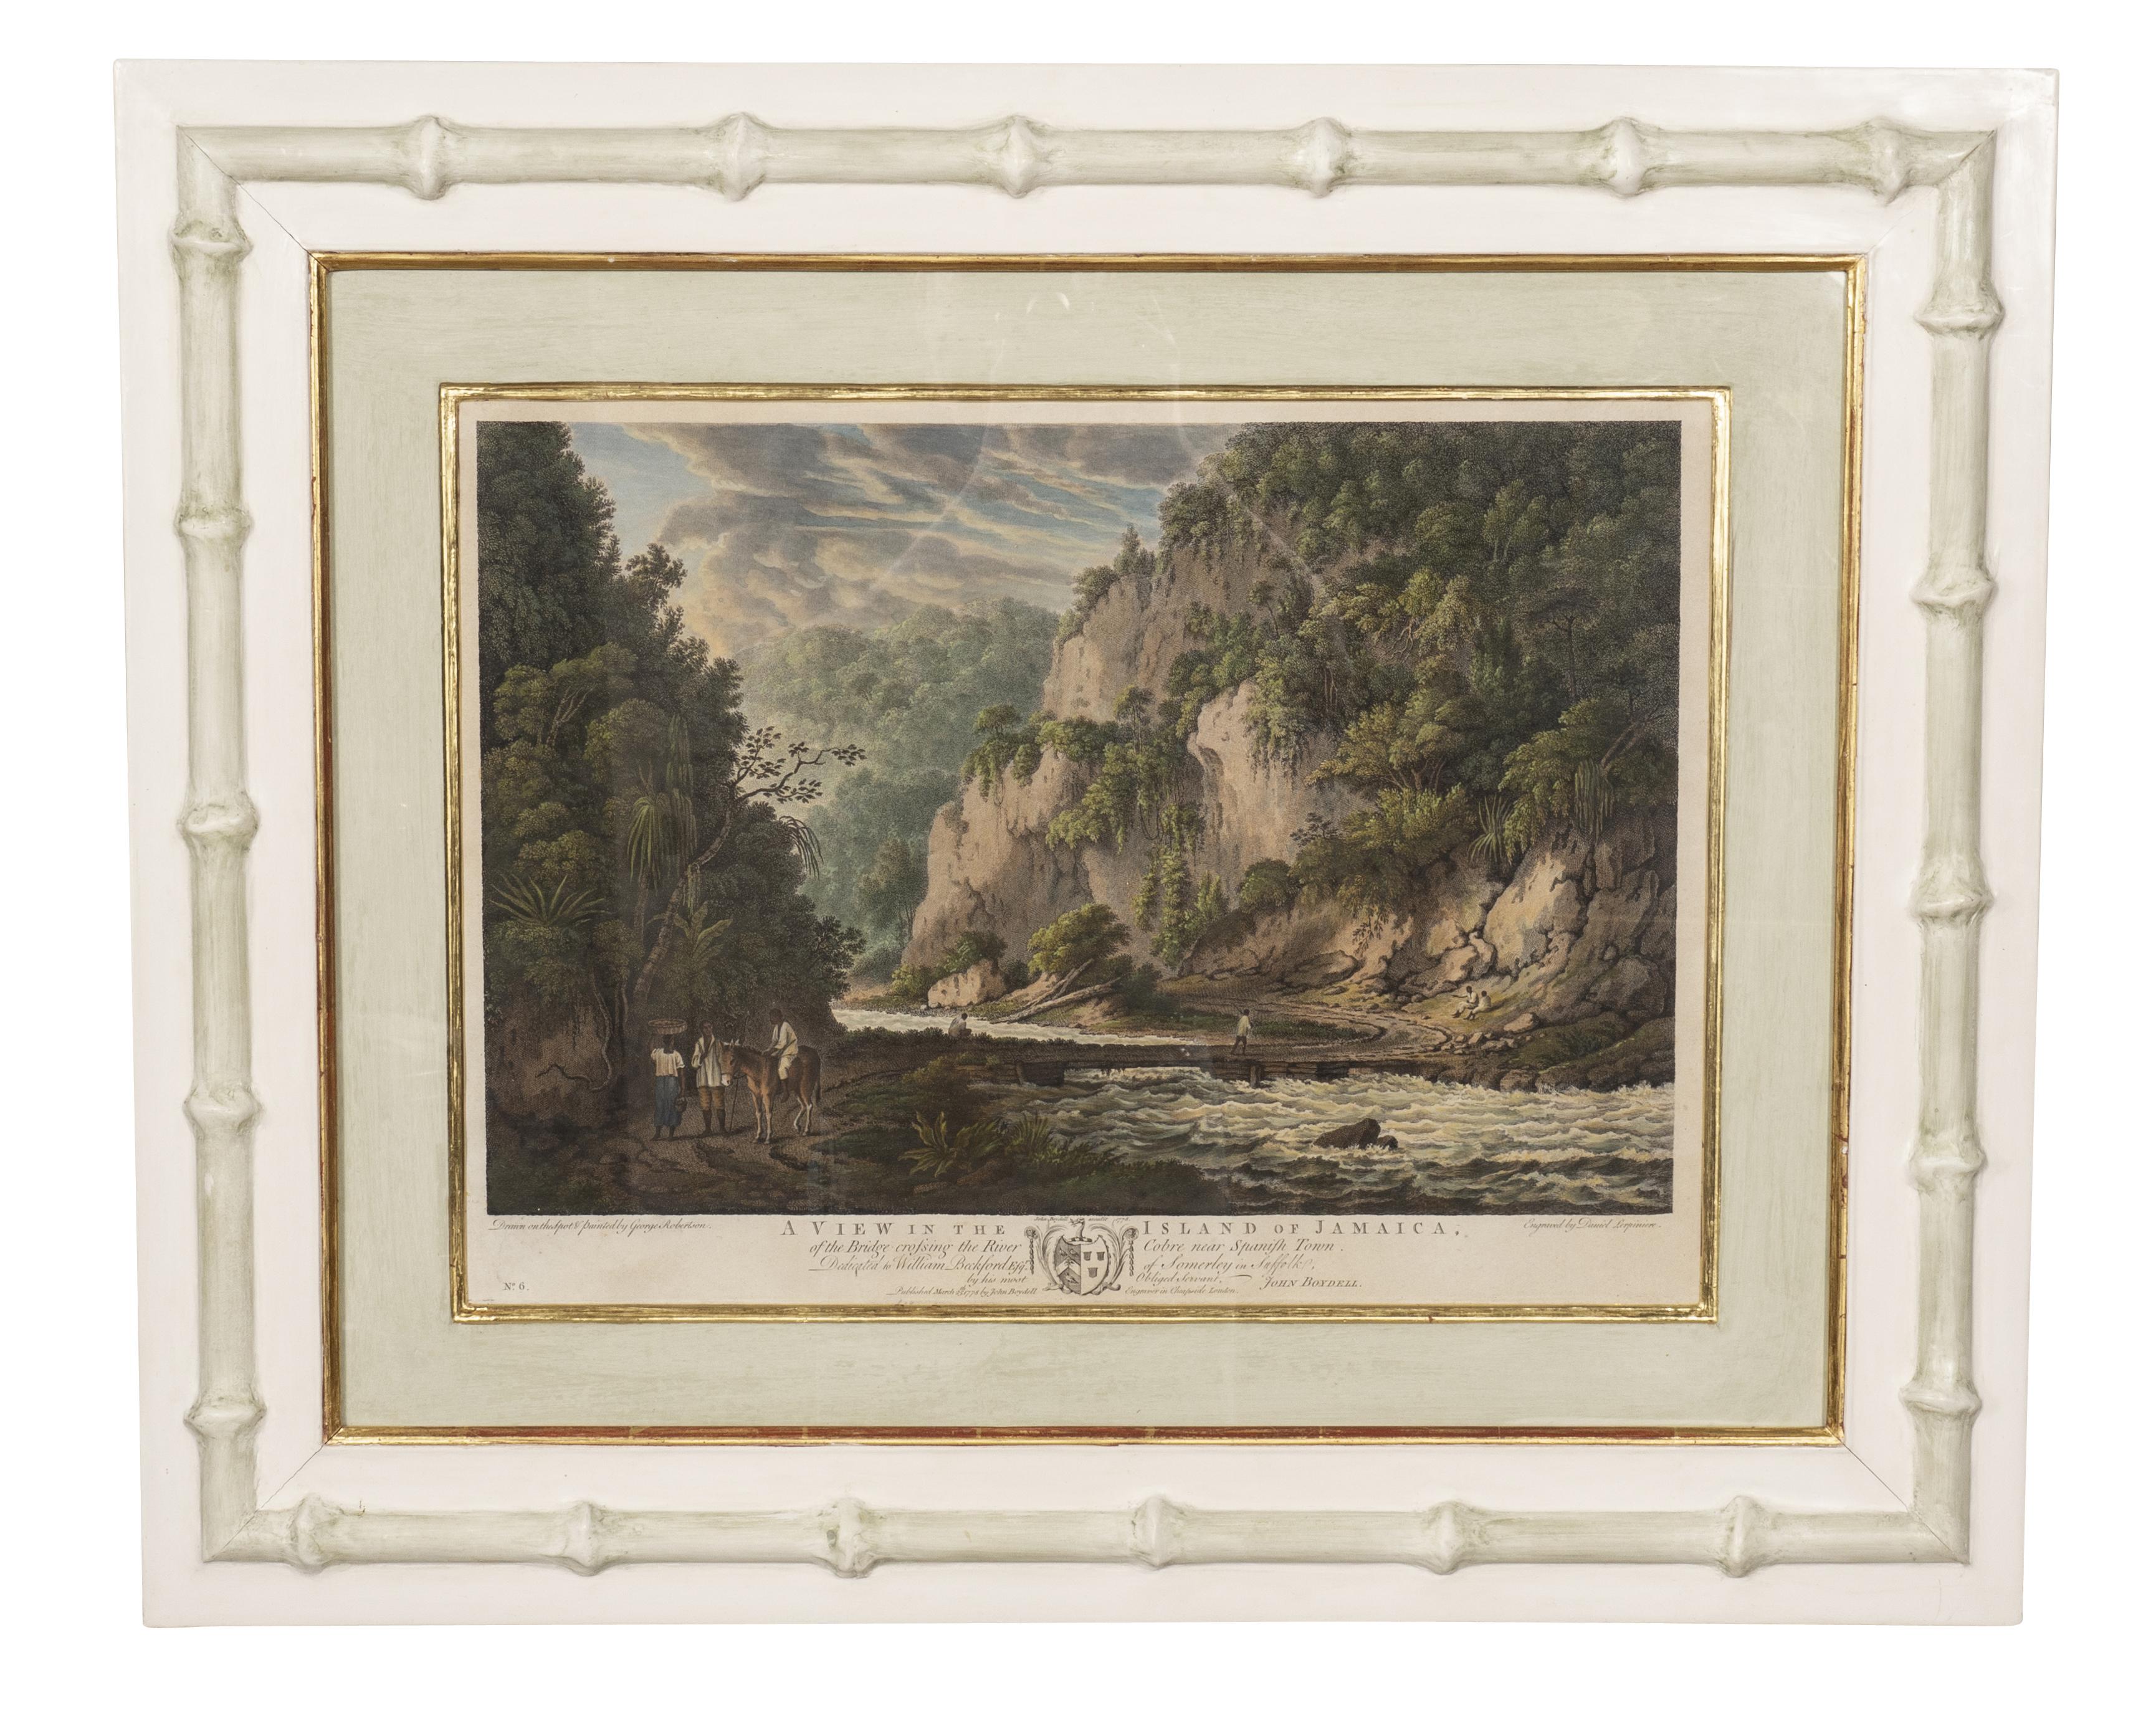 Framed in white painted faux bamboo frames with real gold leaf inner border. The hand colored engravings from the originals by George Robertson. The artist was patronized by William Beckford of Somerley Hall, Suffolk , with whom Robertson went to